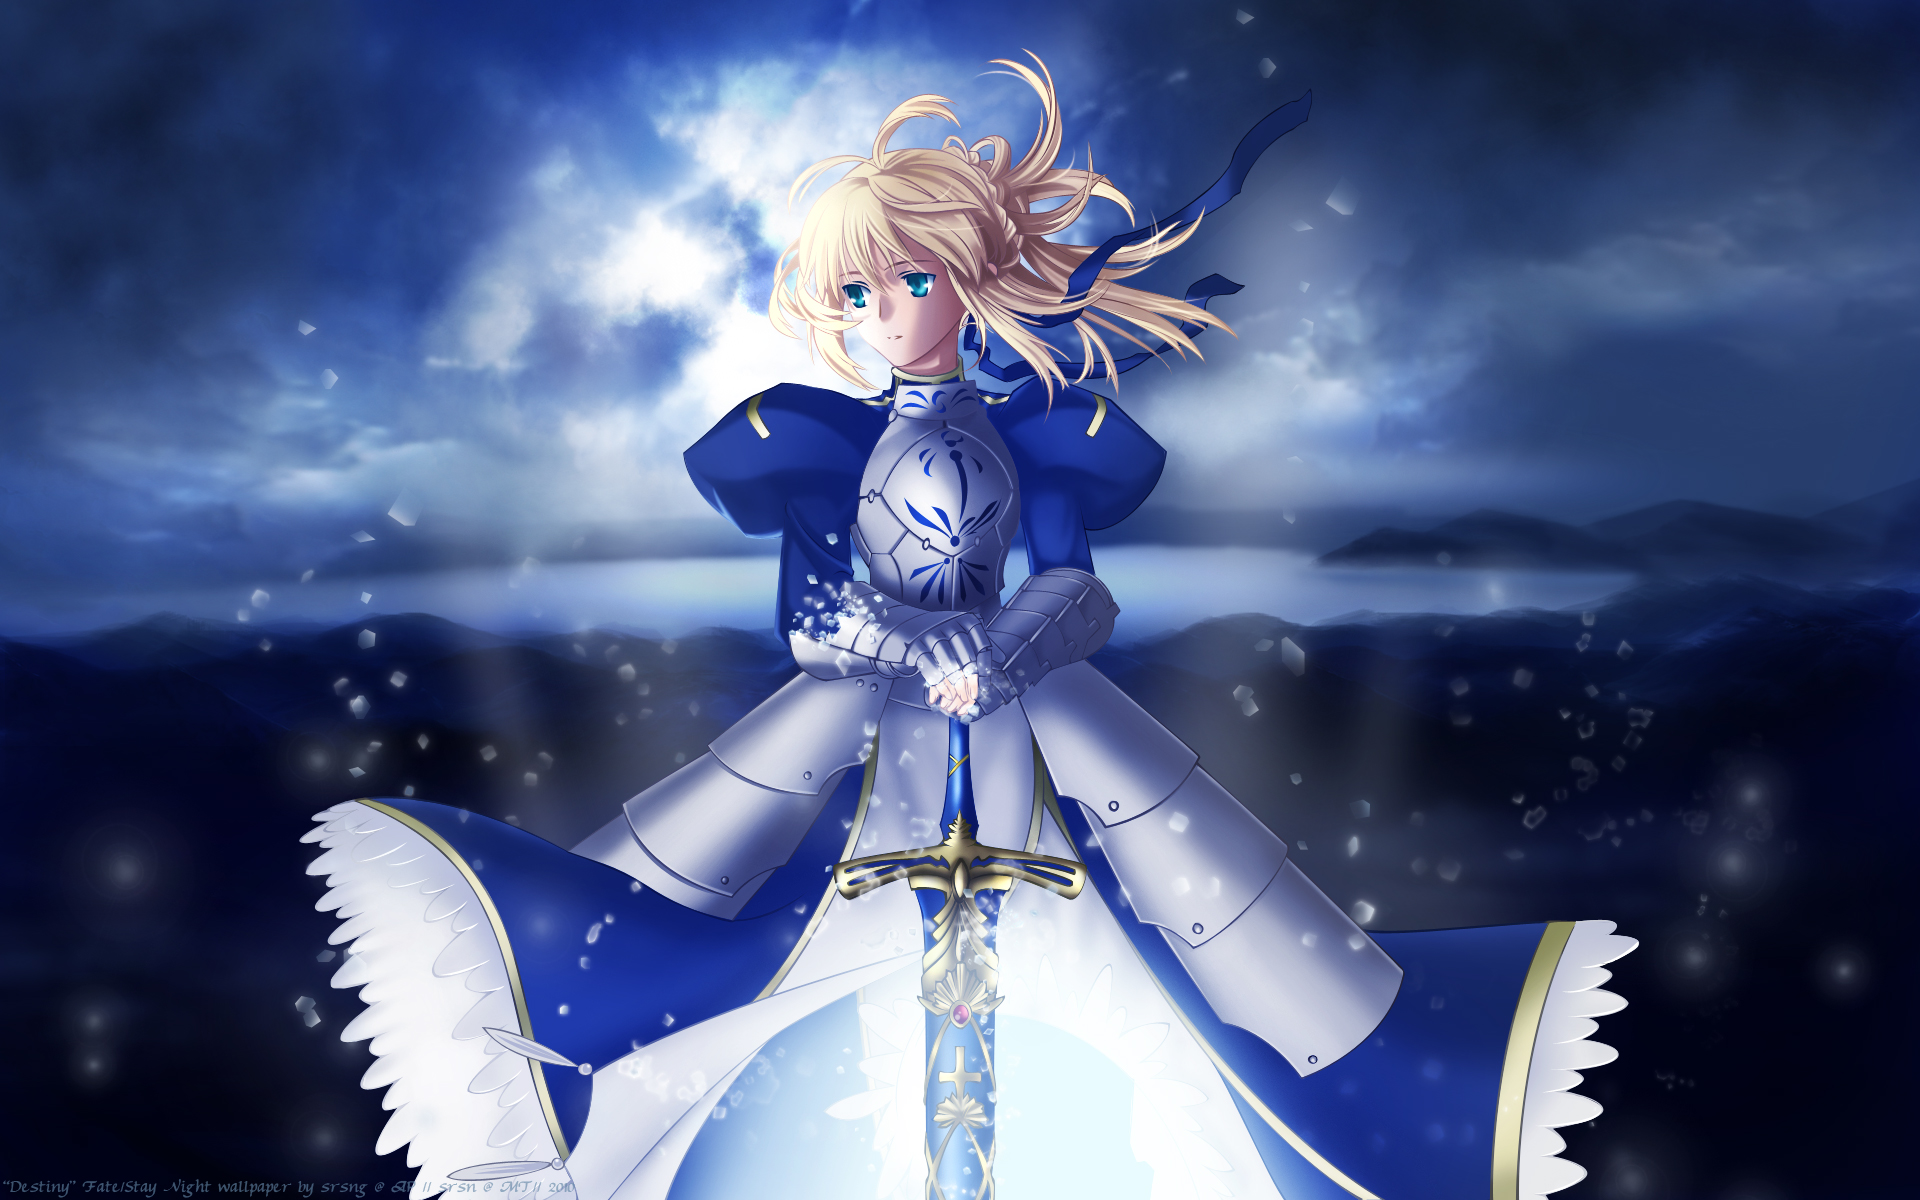 Saber fate stay night wallpaper 1920x1200 14900